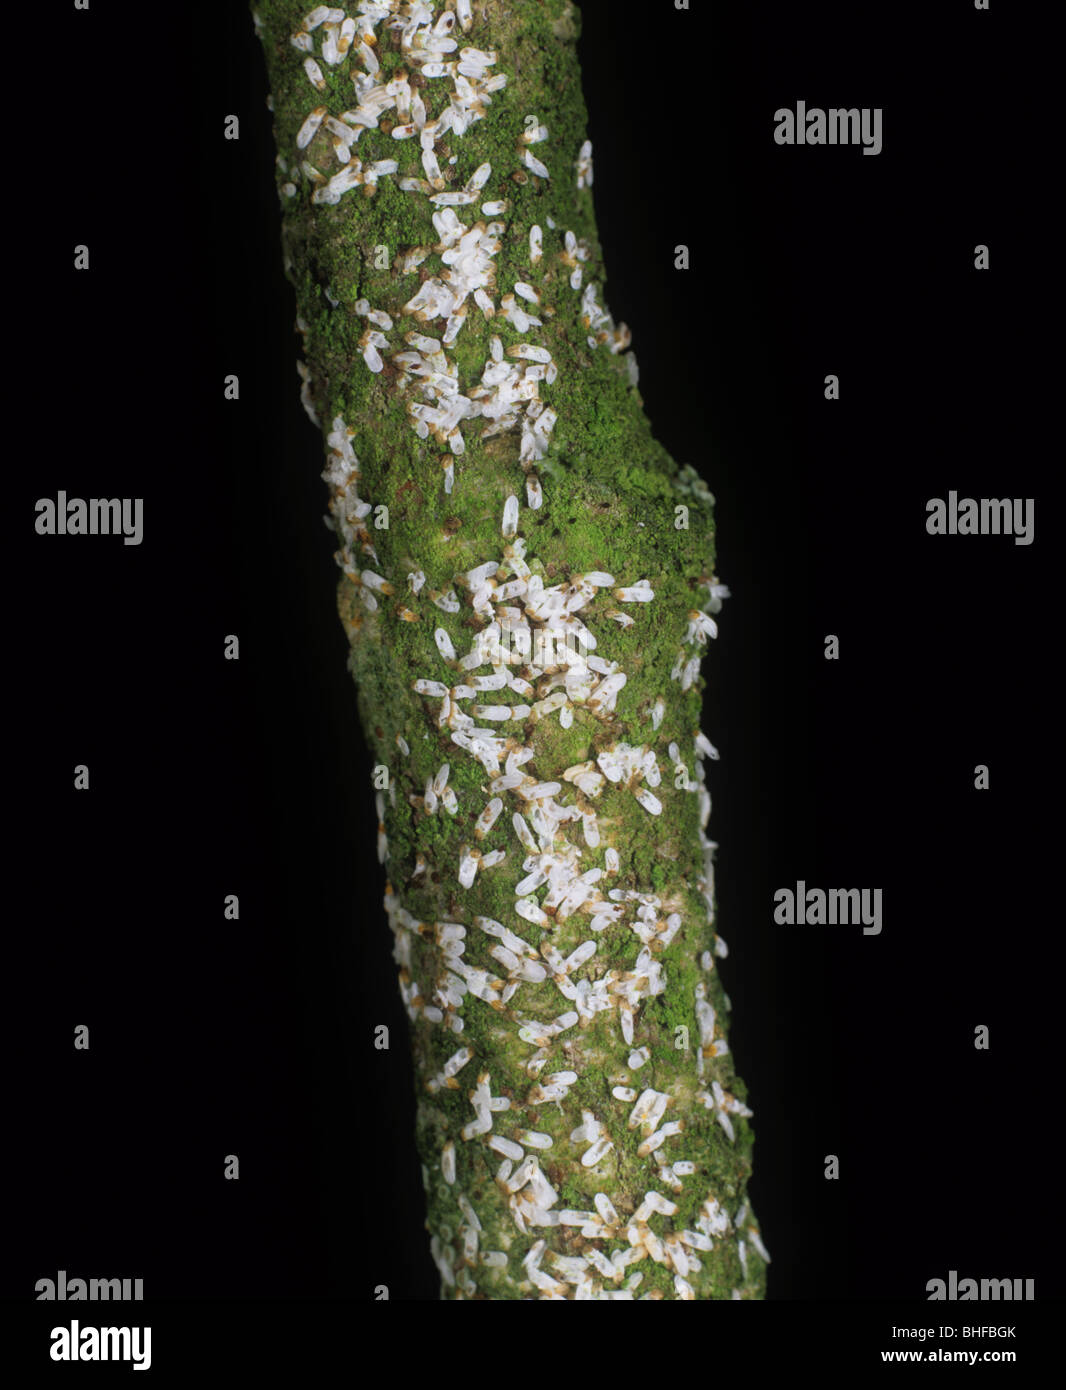 Willow scale insects (Chionaspis salicis) on willow tree wood Stock Photo